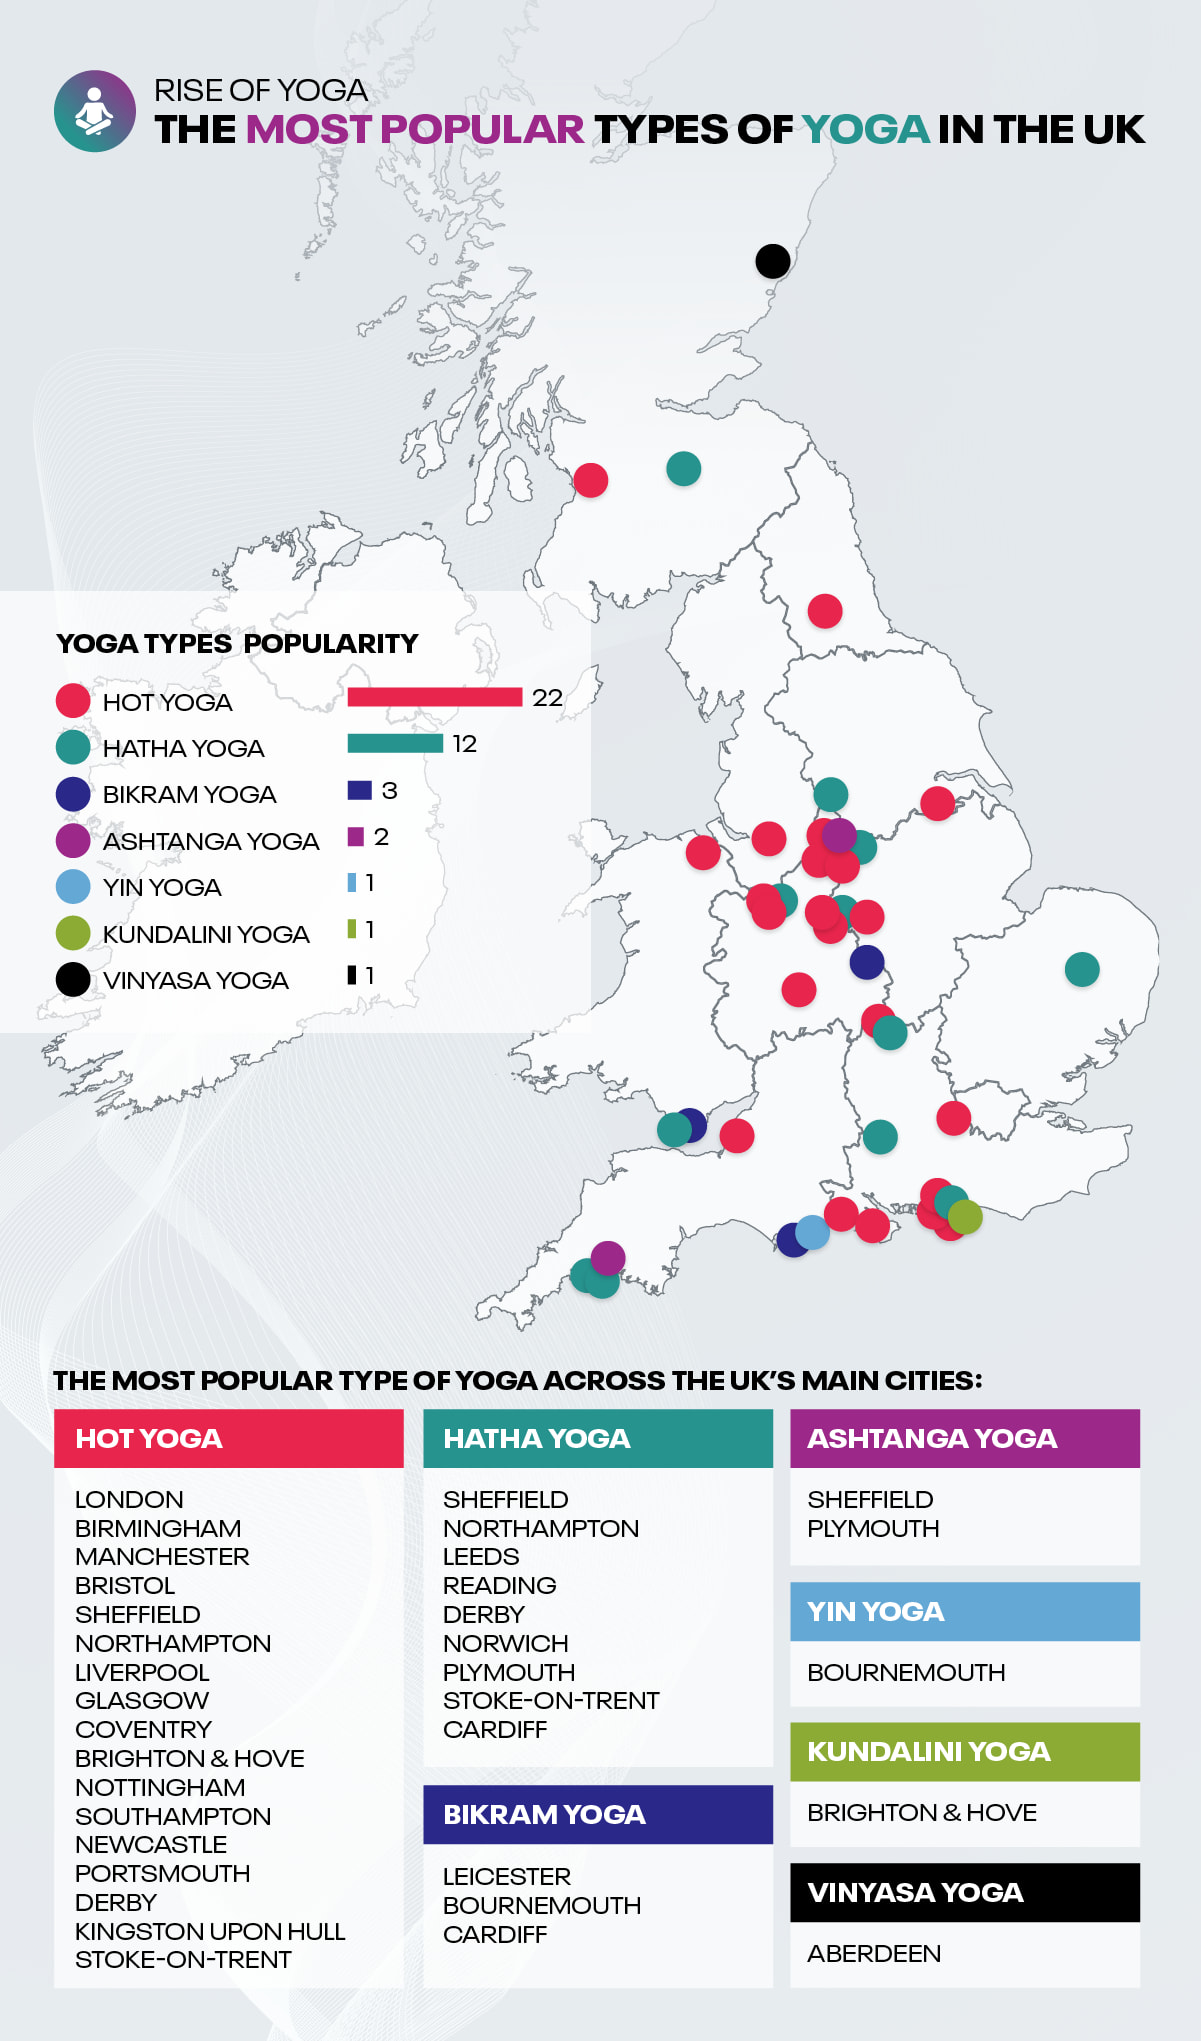 The most popular types of Yoga in the UK